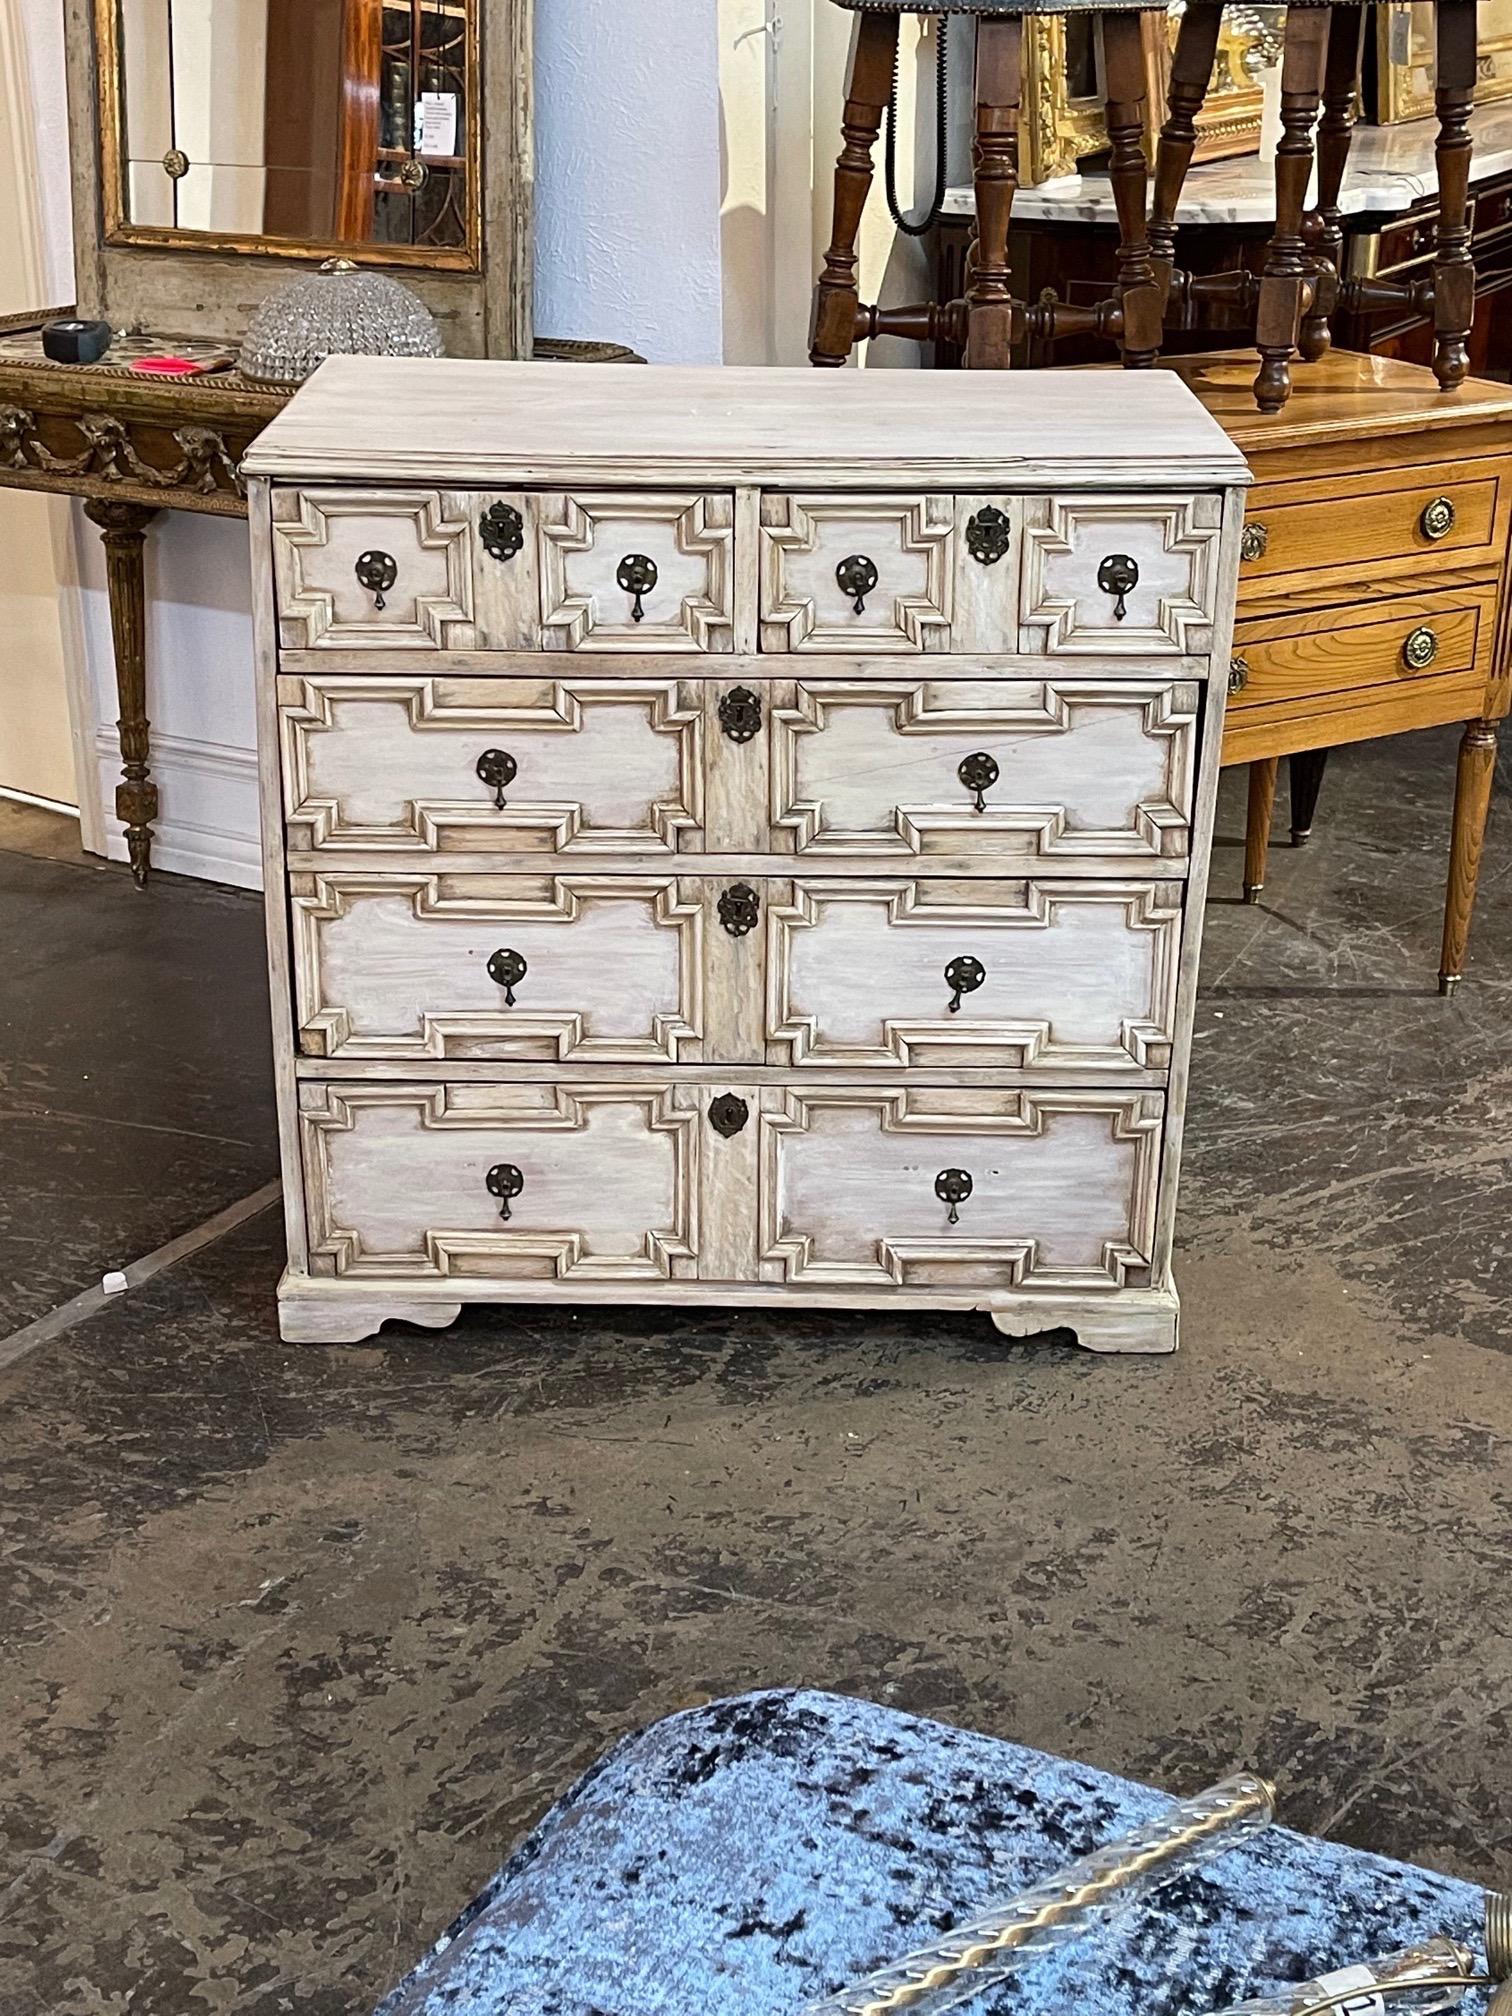 Decorative 19th century English Jacobean bleached mahogany chest with interesting geometric design. Very nice patina and lots of storage as well. So pretty!!